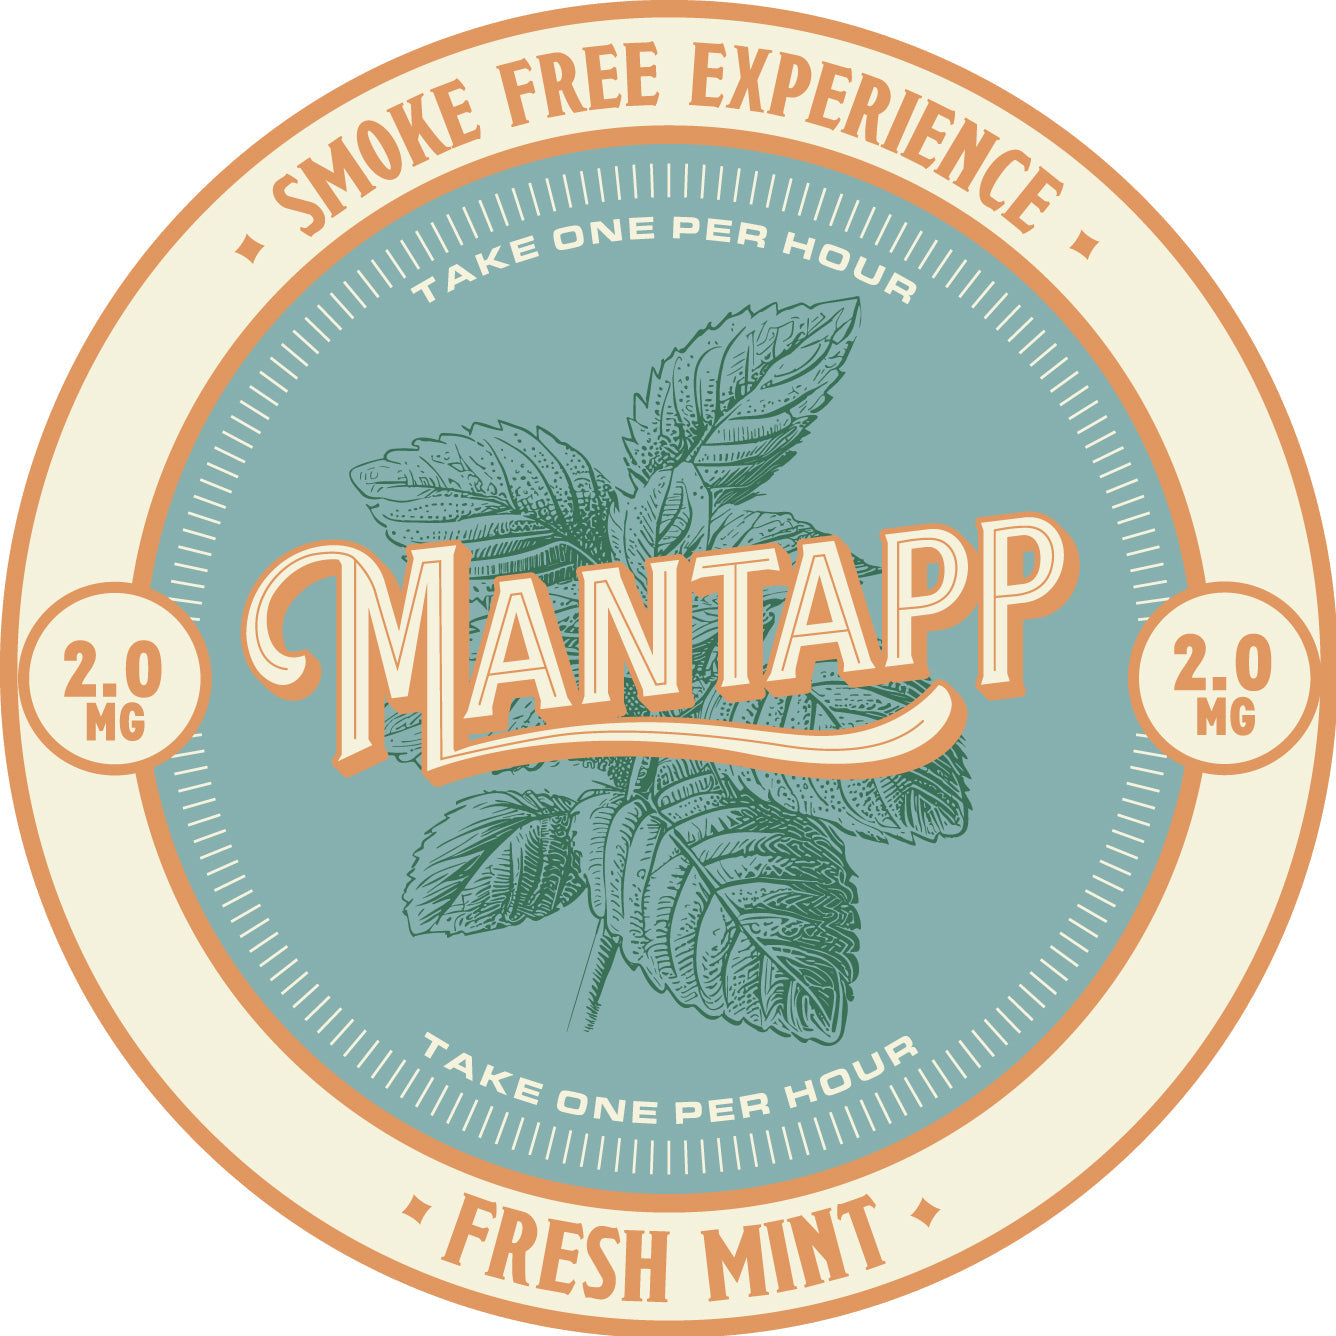 Mantapp Nicotine Pouch - Fresh Mint 2mg     (5 Pack)